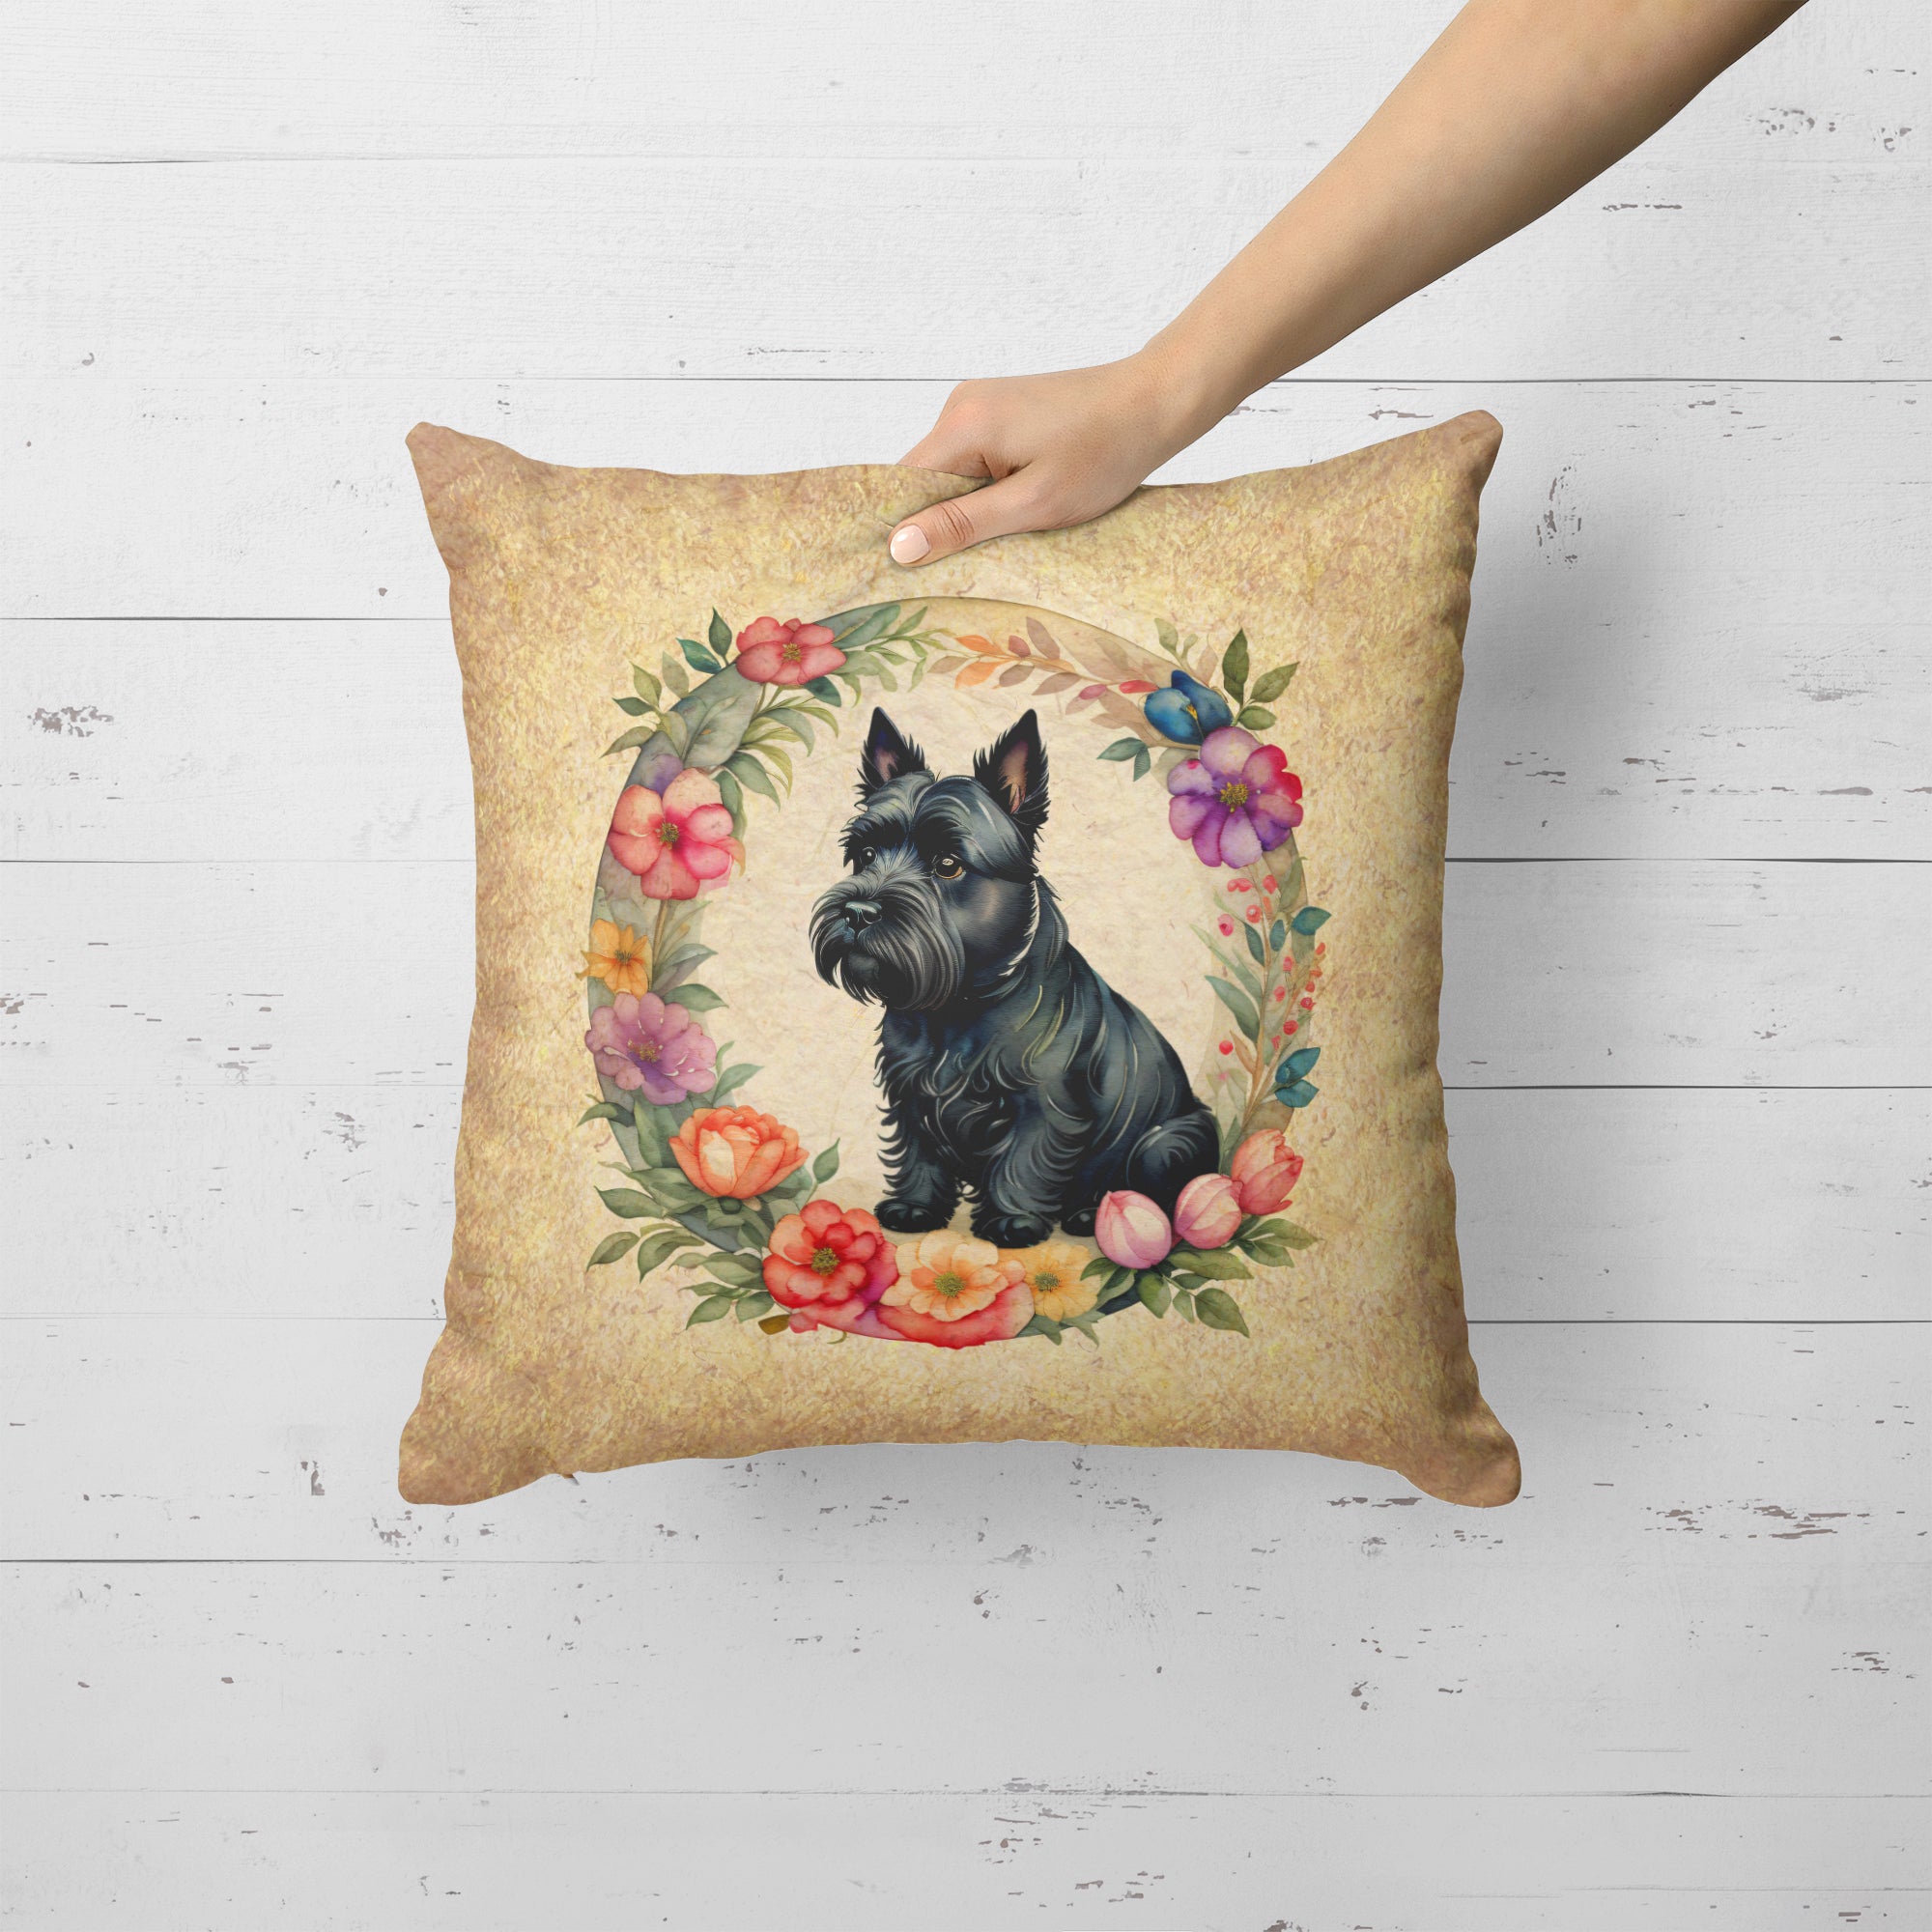 Buy this Scottish Terrier and Flowers Fabric Decorative Pillow